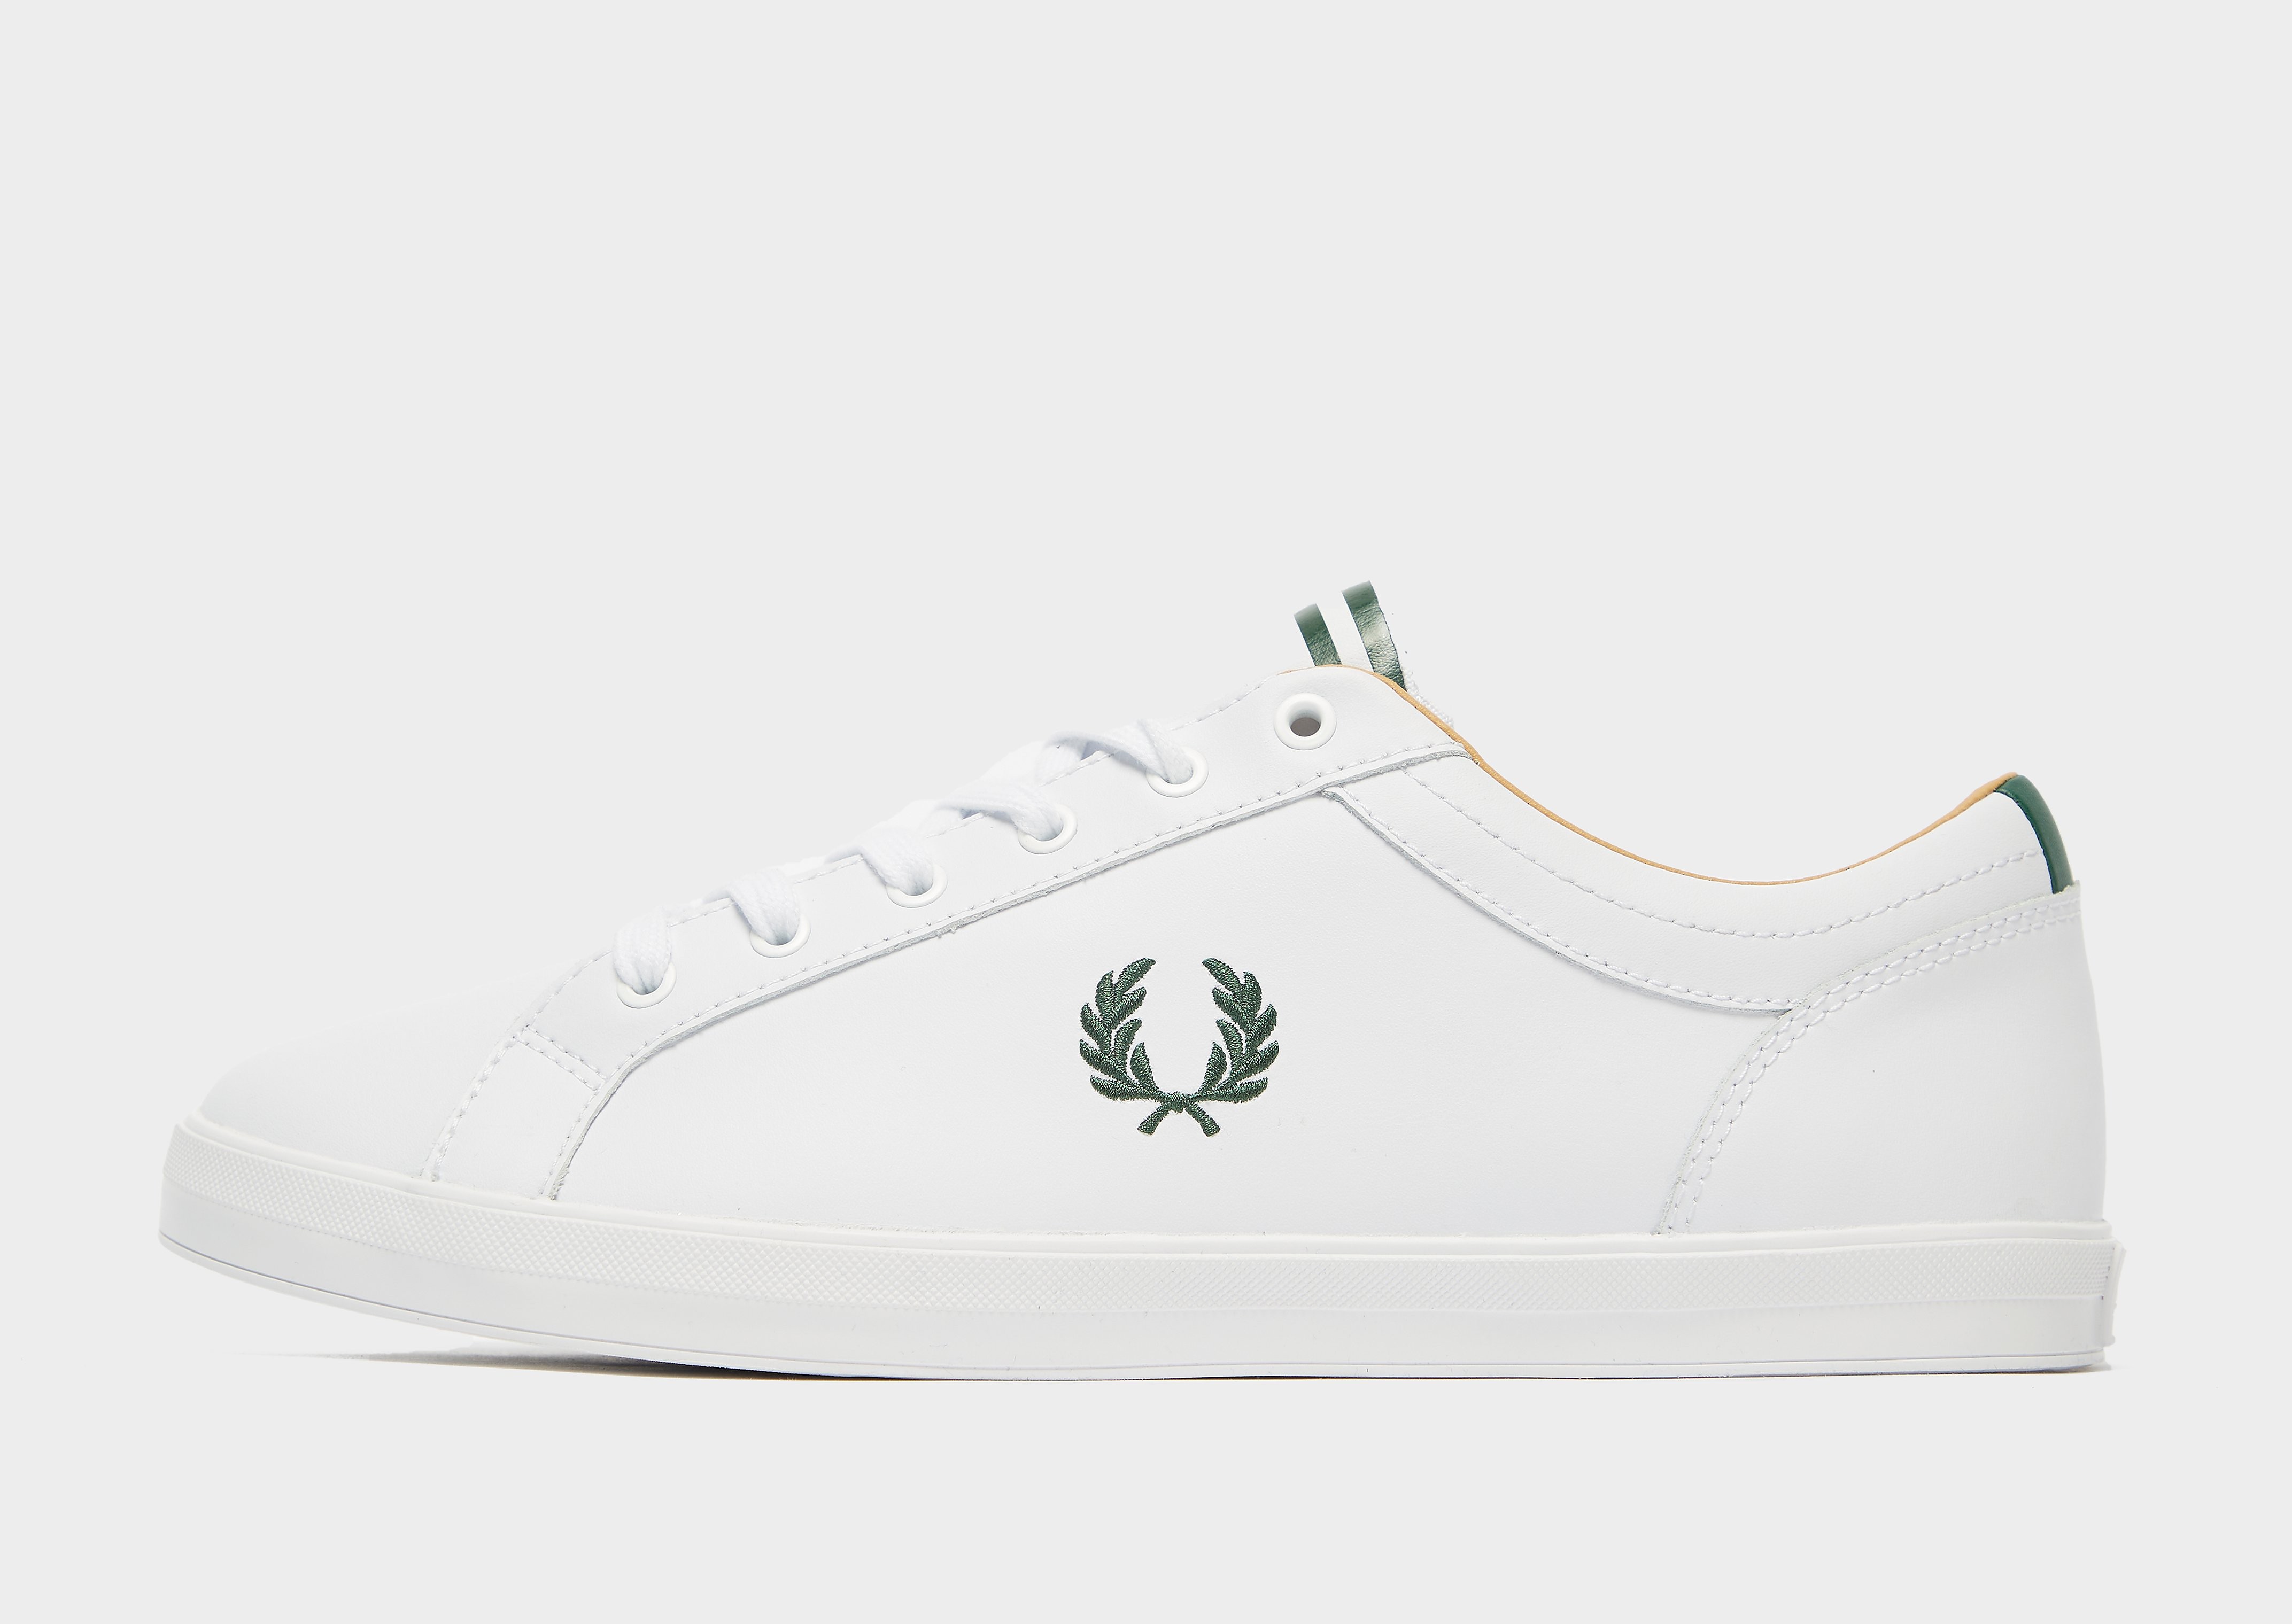 Fred perry baseline miehet - mens, valkoinen, fred perry